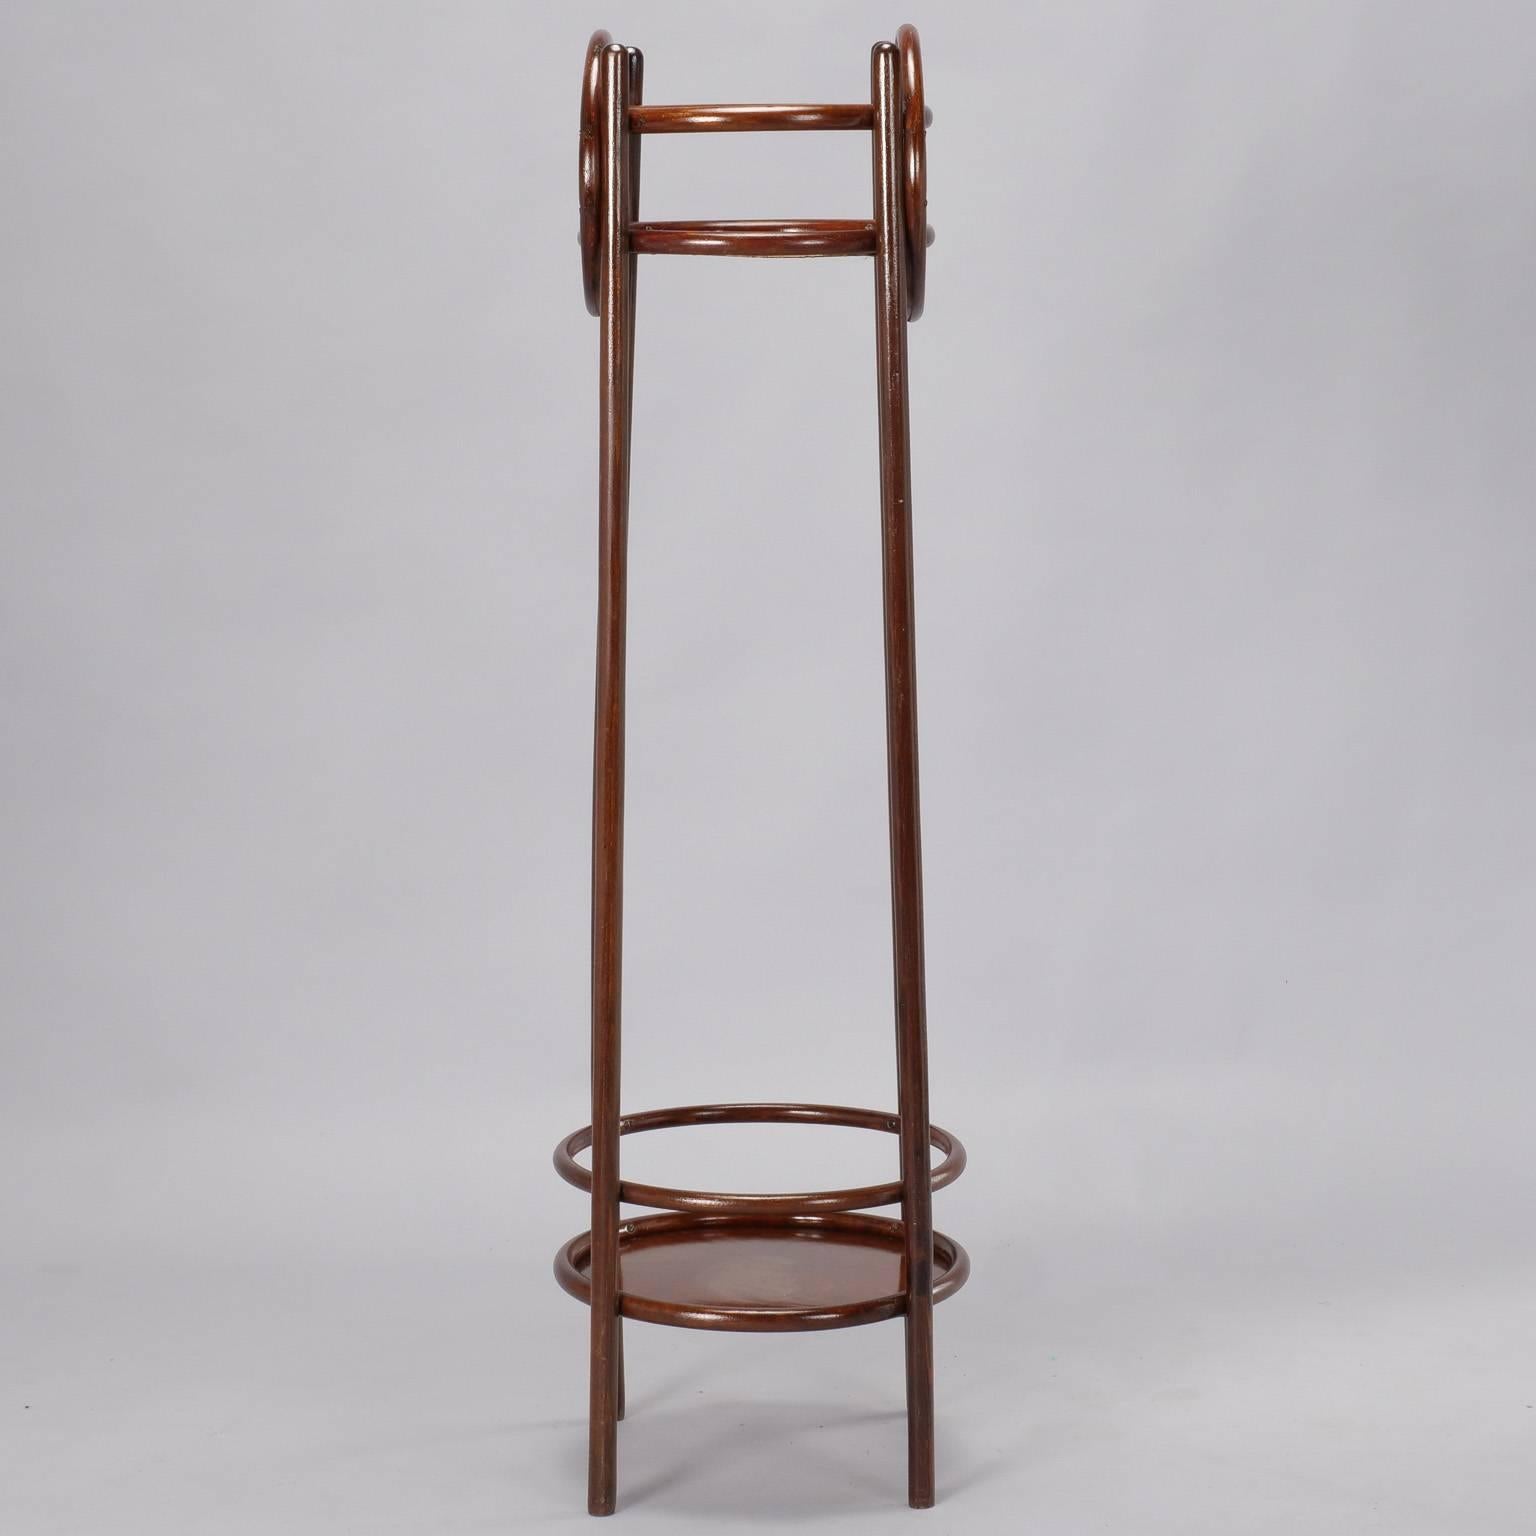 Tall bentwood plant stand has four dark polished wood legs with lower and upper shelves highlighted by decorative circular embellishments on sides, circa 1930s.